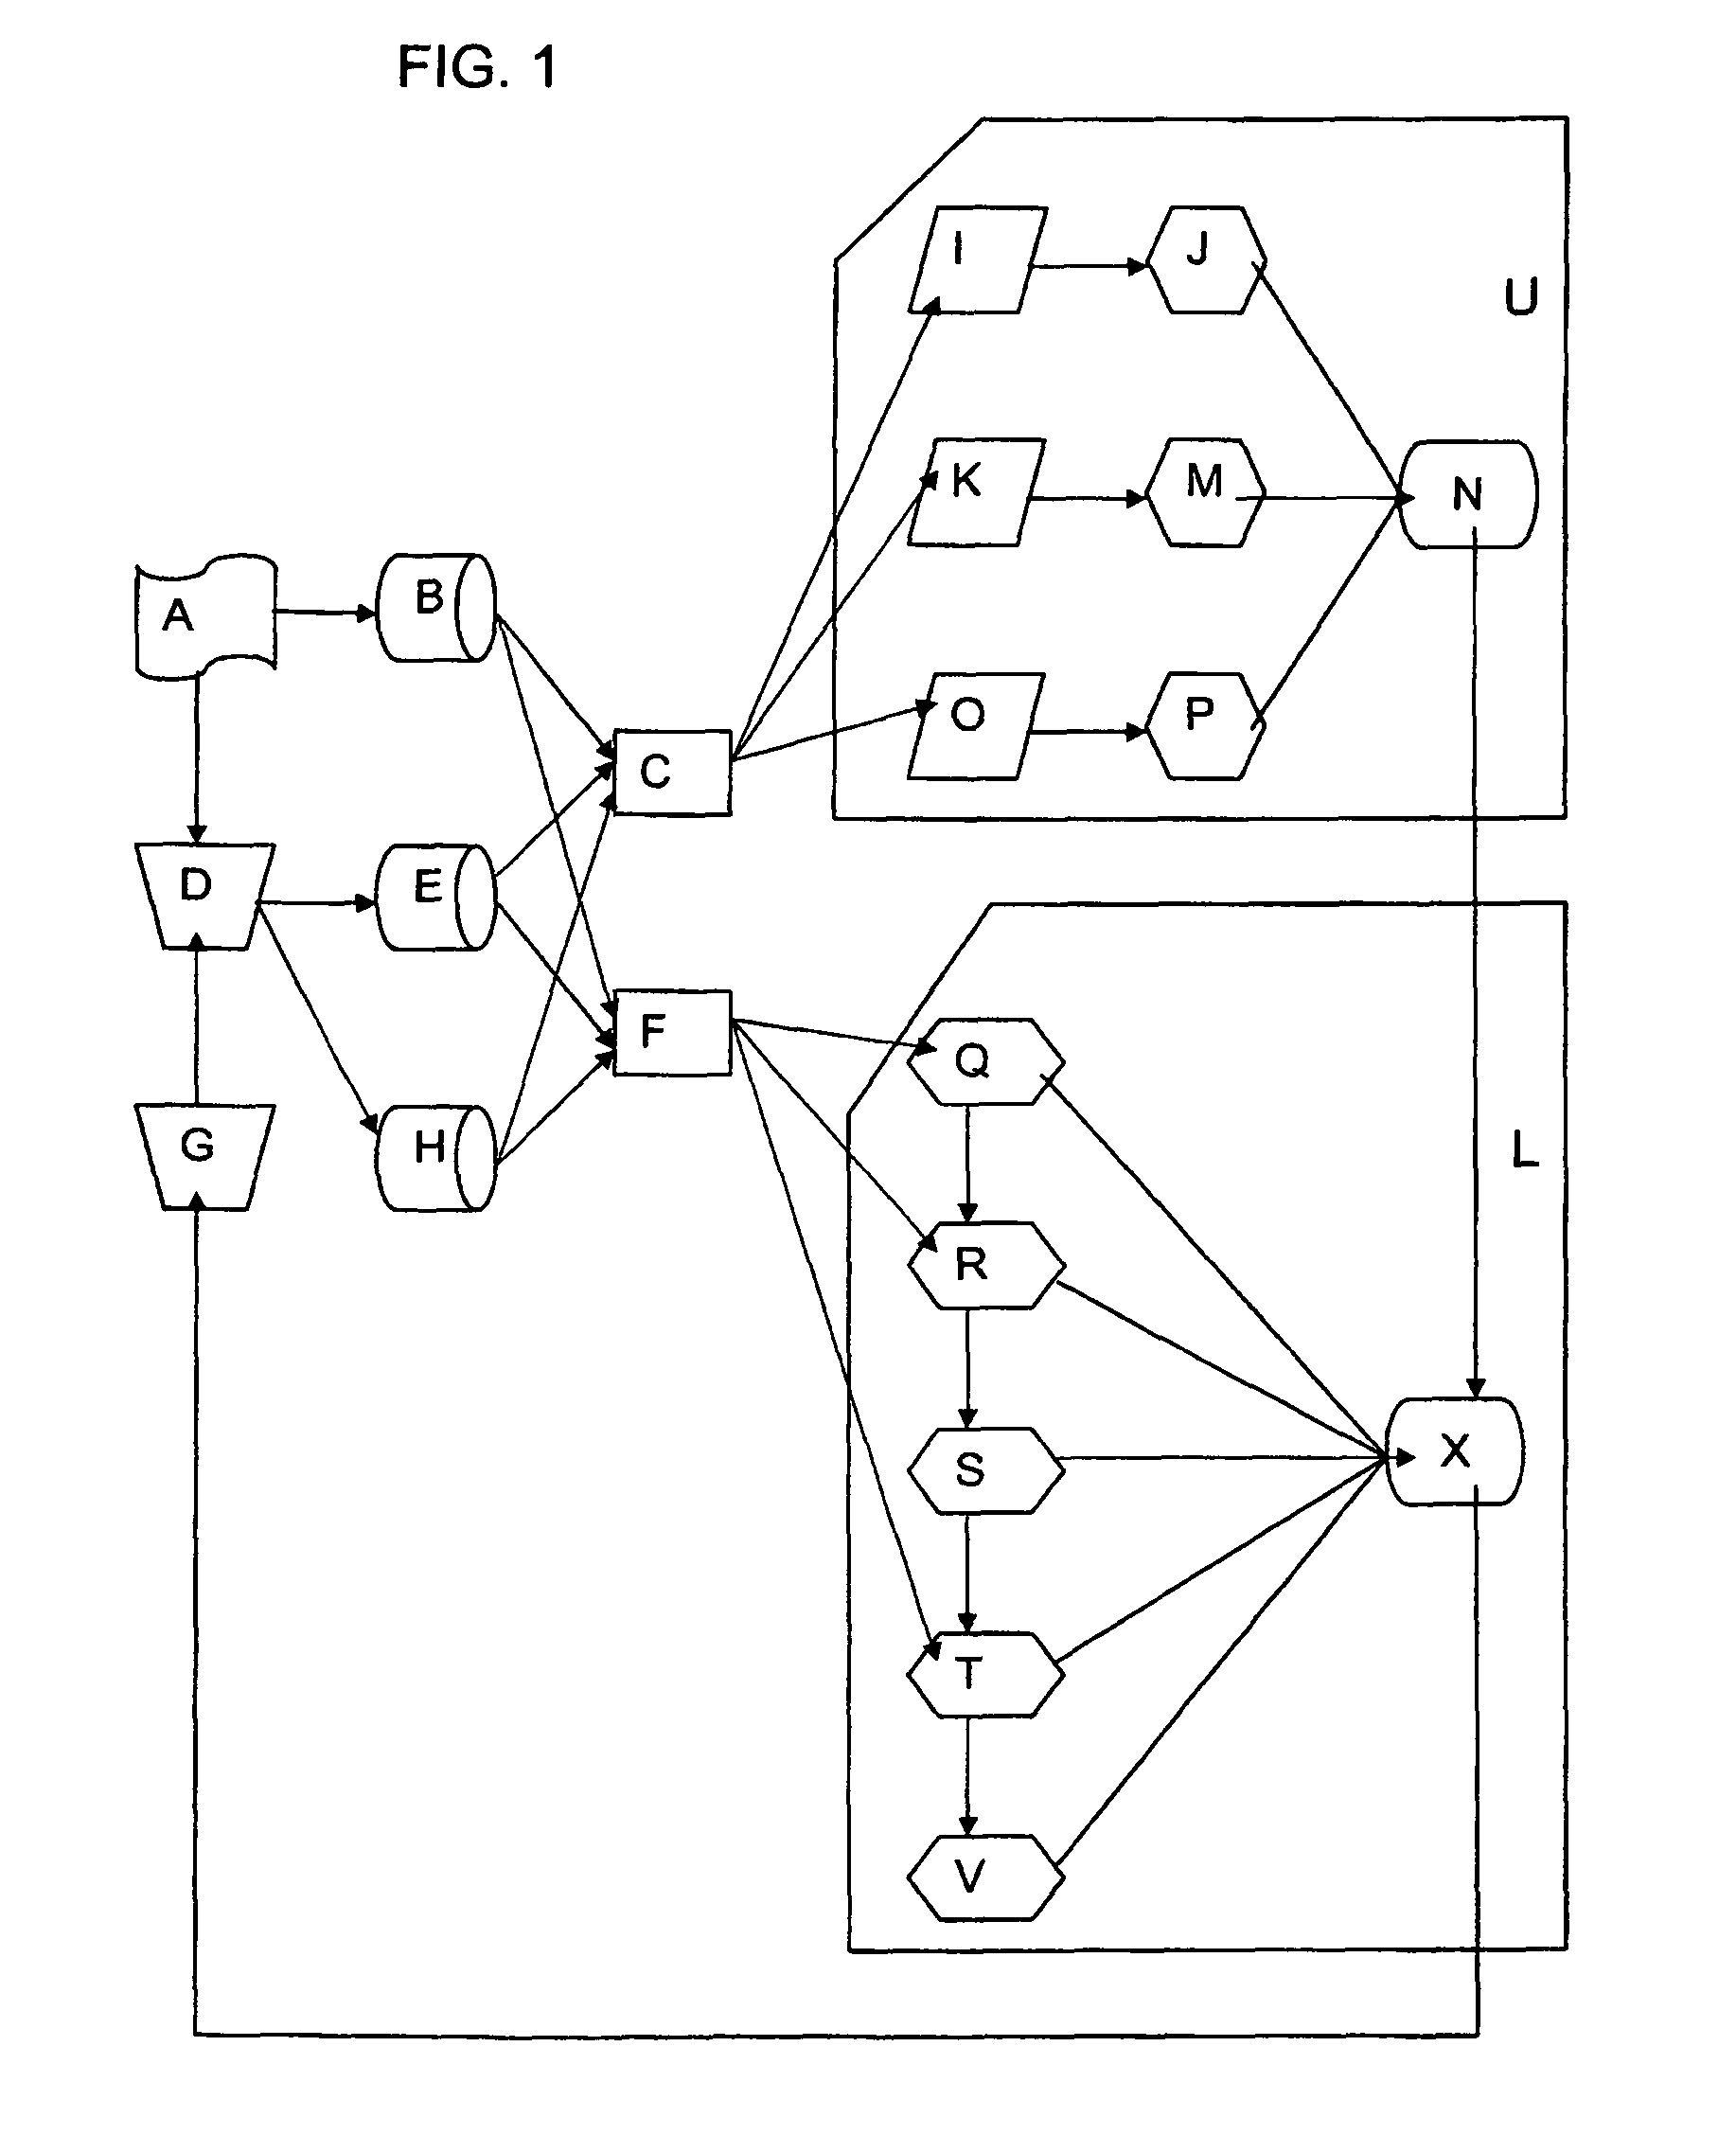 Control system for wind turbine